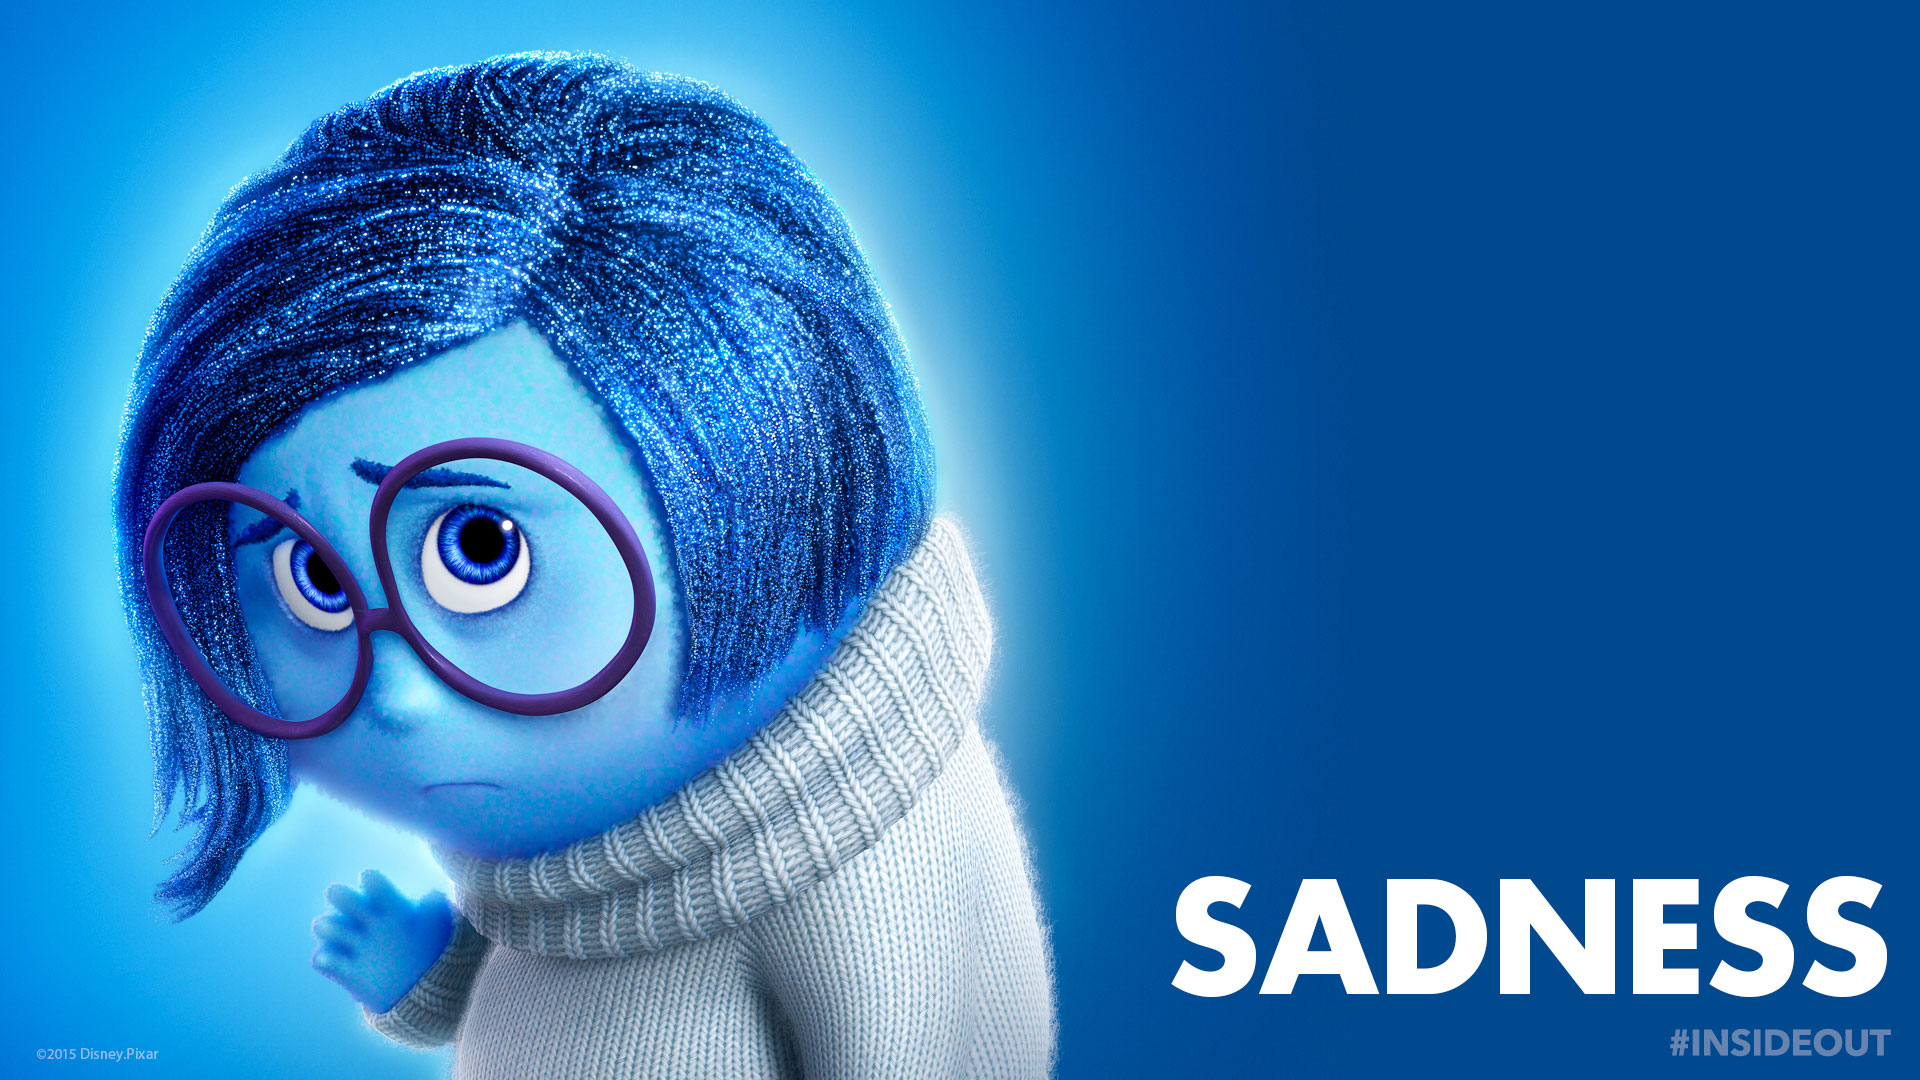 Inside Out Sadness Wallpaper backgrounds 2015 1920x1080